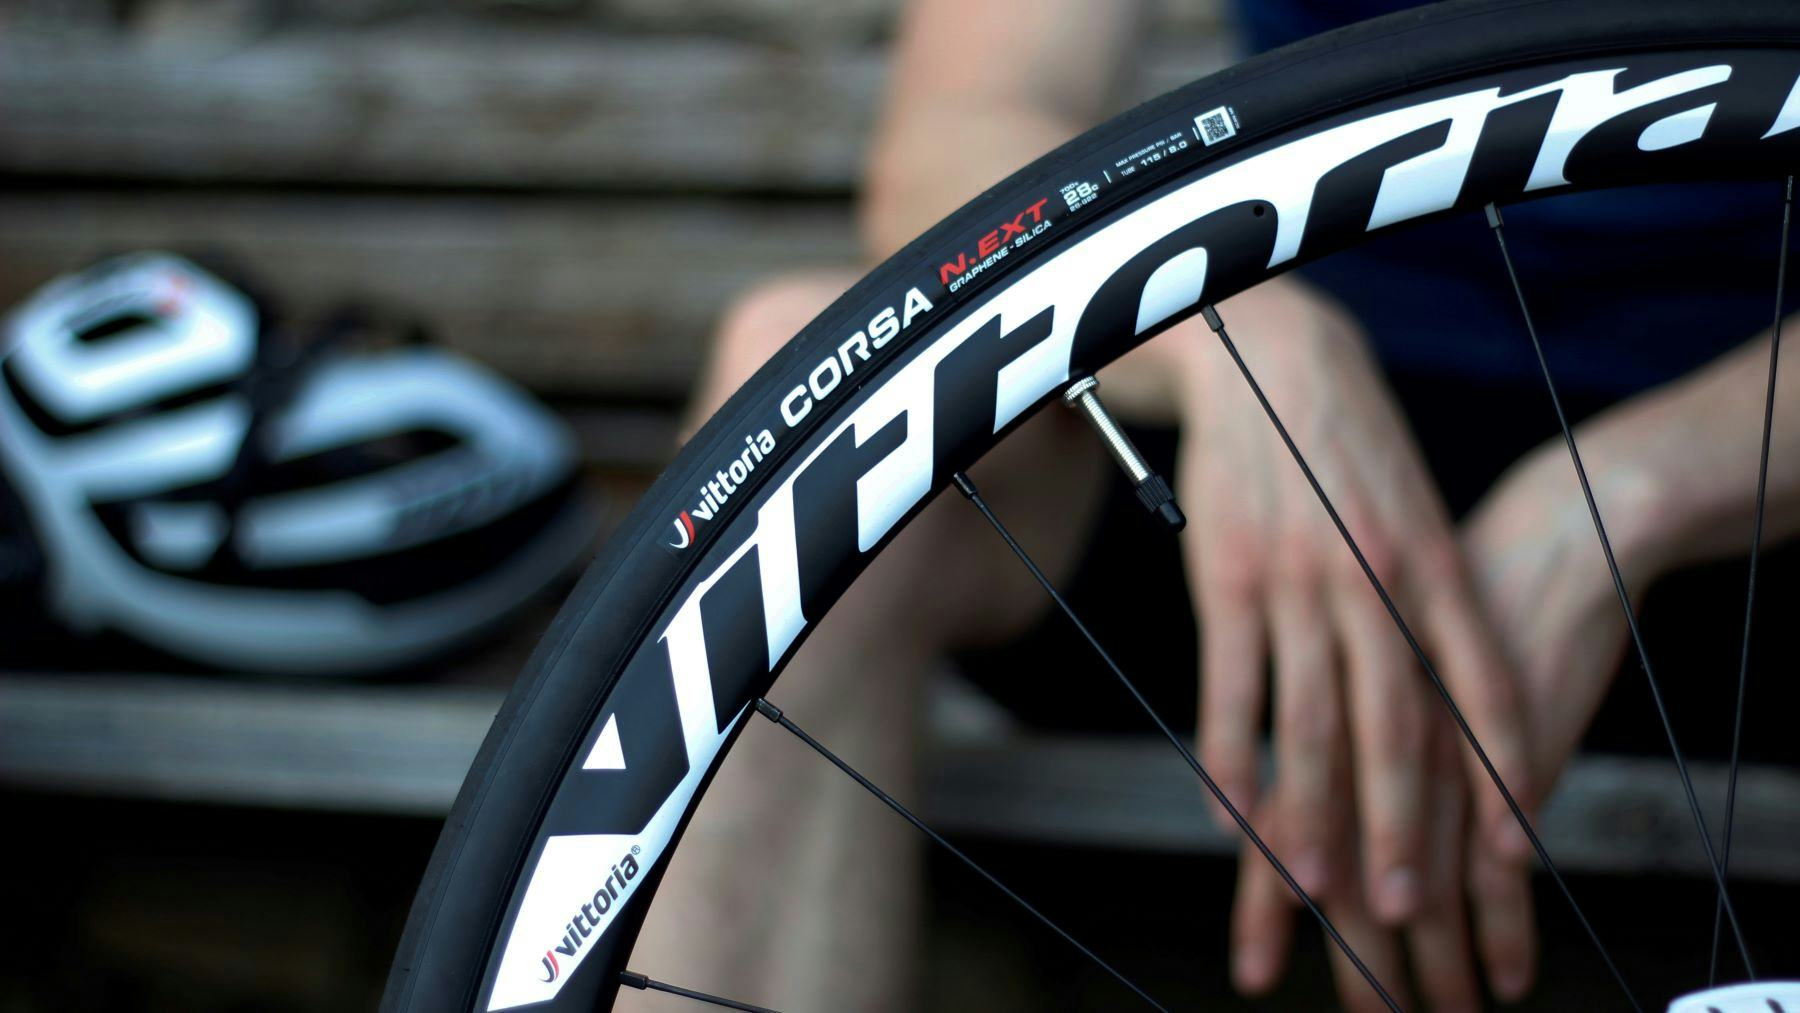 The Corsa N.EXT utilises a unique compound technology, combining Vittoria’s Graphene research-applied knowledge with Silica. – Photo Vittoria